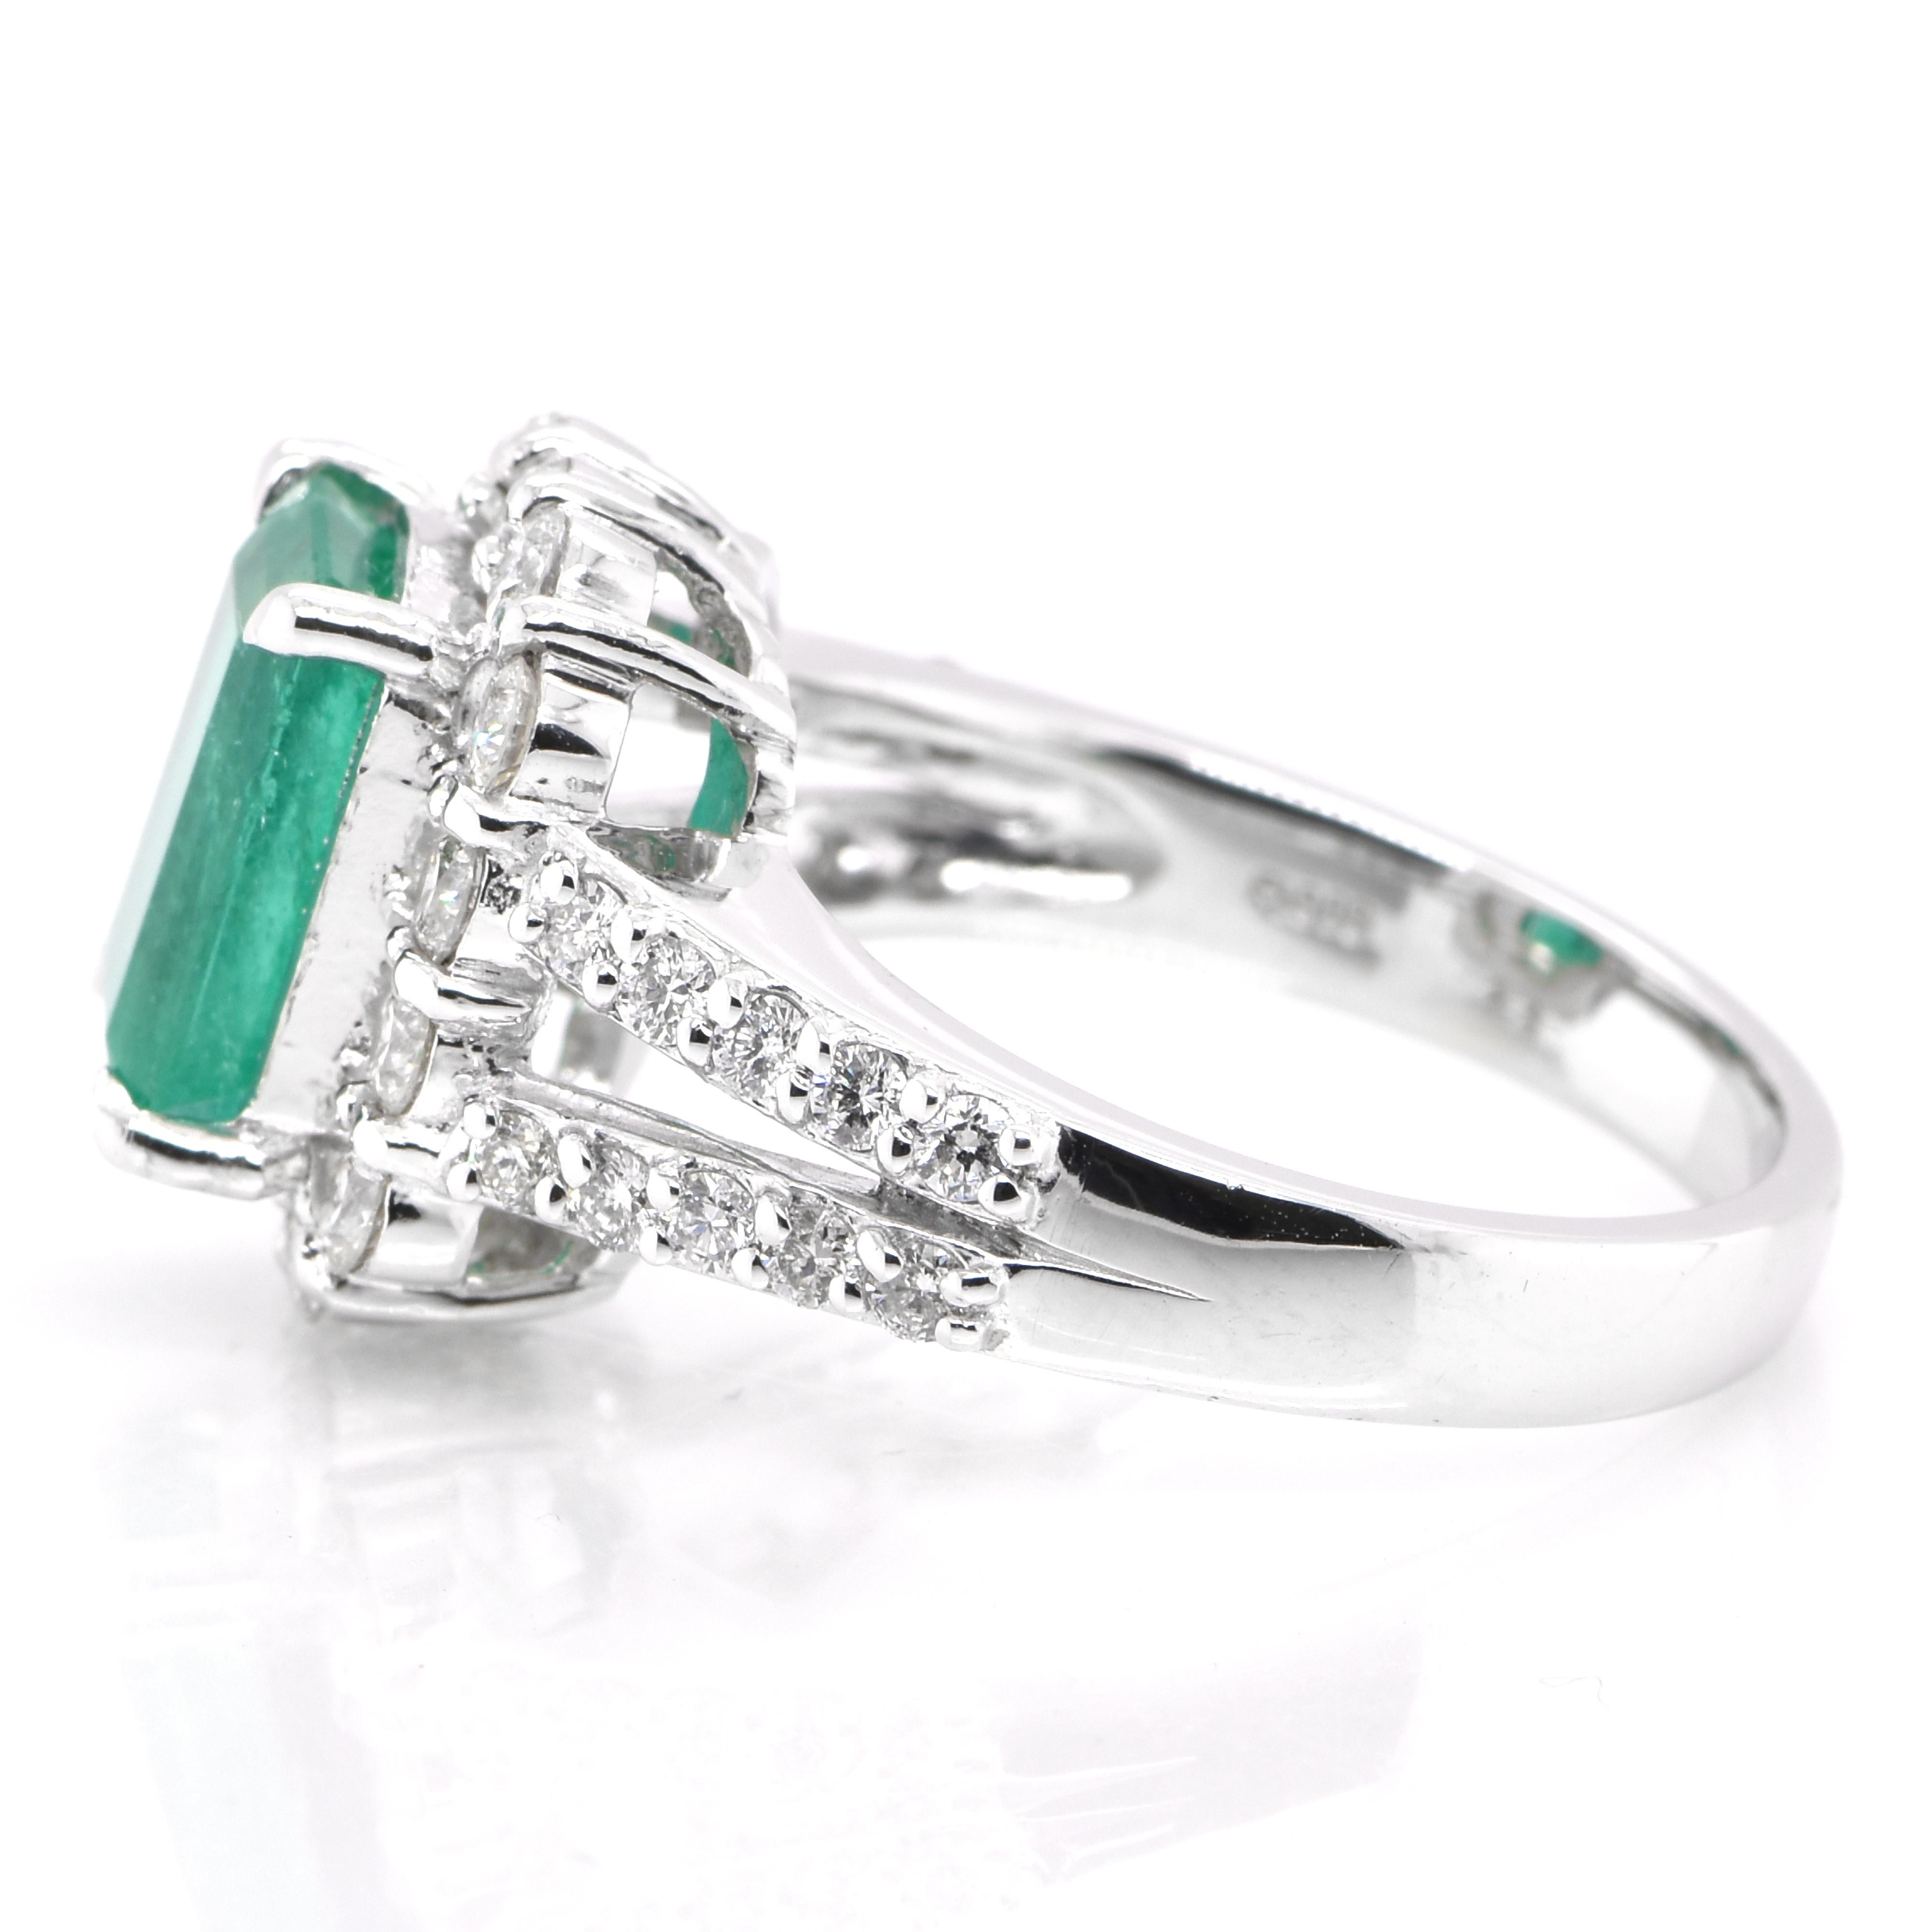 Emerald Cut 2.49 Carat Colombian Emerald and Diamond Ring Set in Platinum For Sale